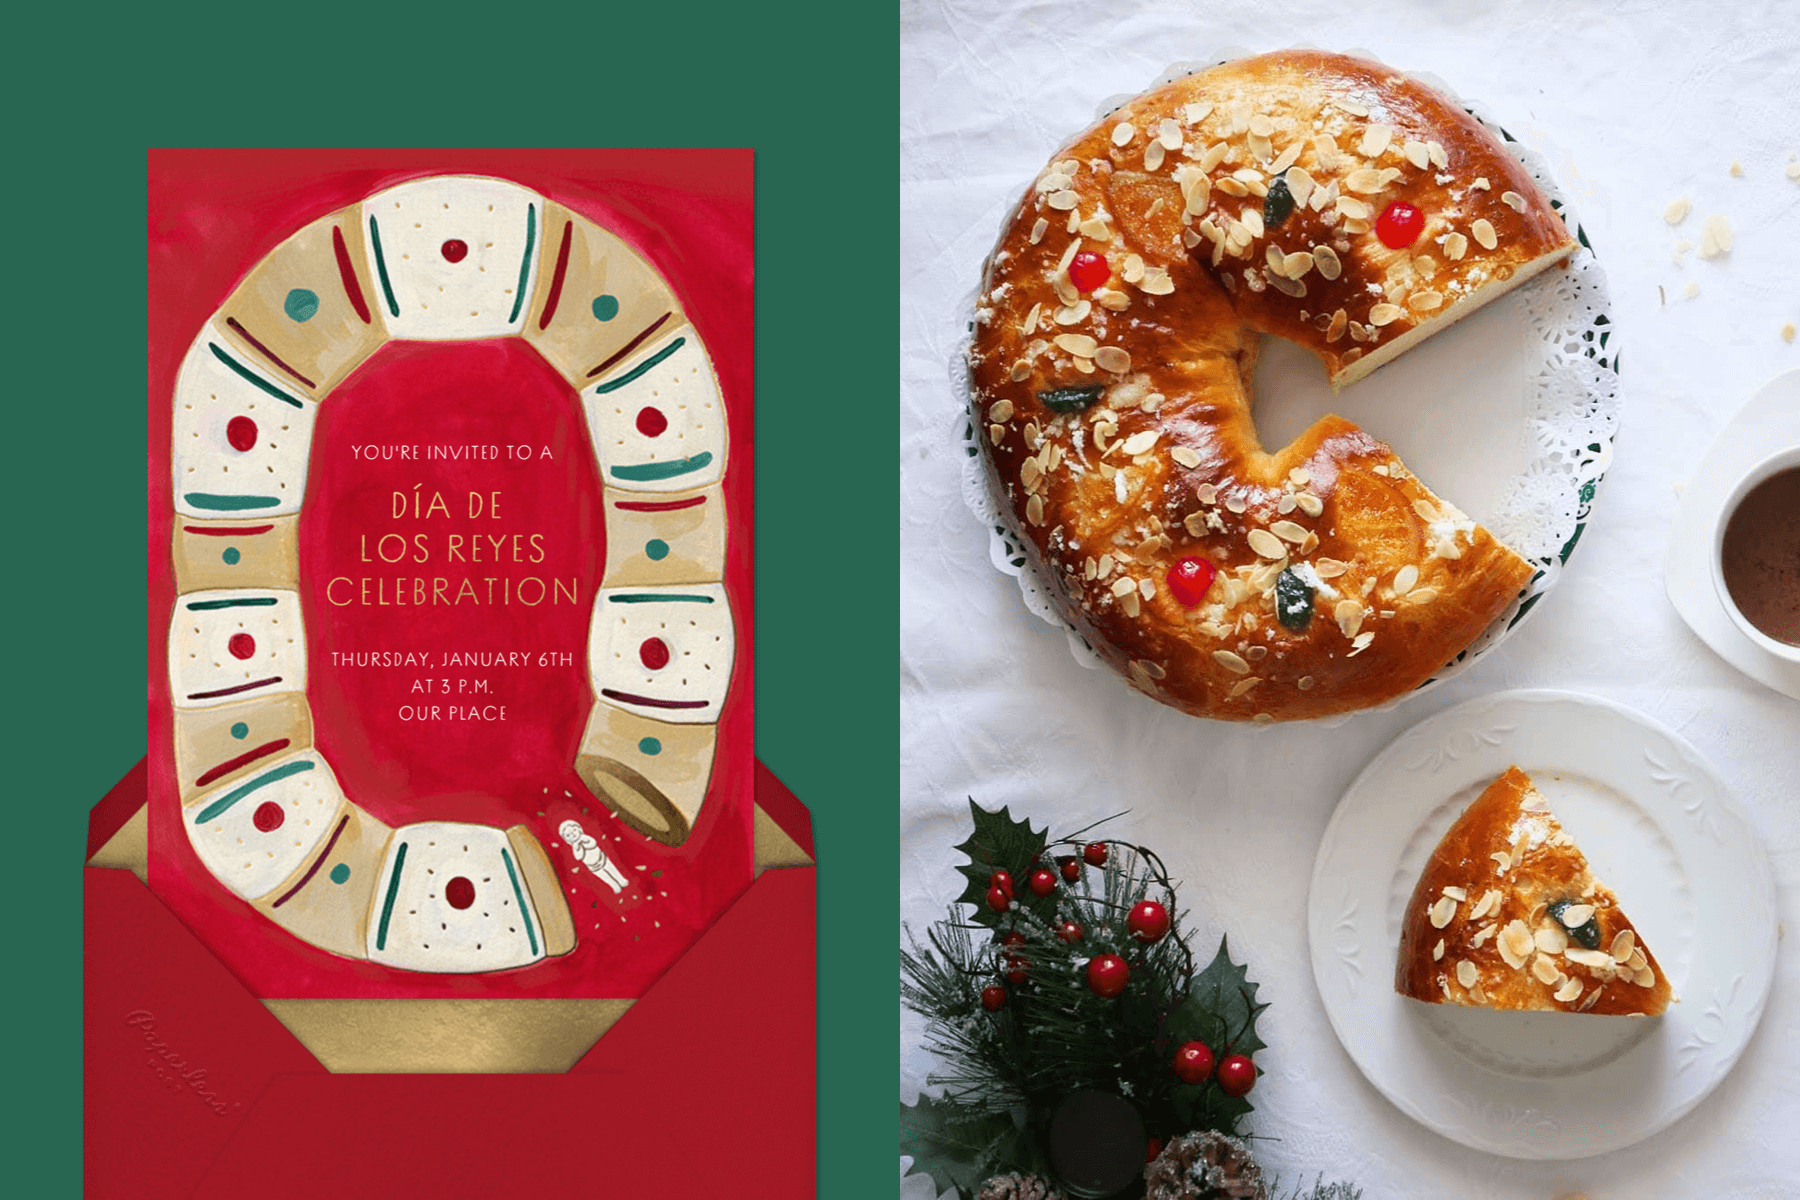 left: A red holiday party invitation shows an illustrated roscón de Reyes with a small baby figurine falling out. Right: A roscón de Reyes with a slice cut out. 